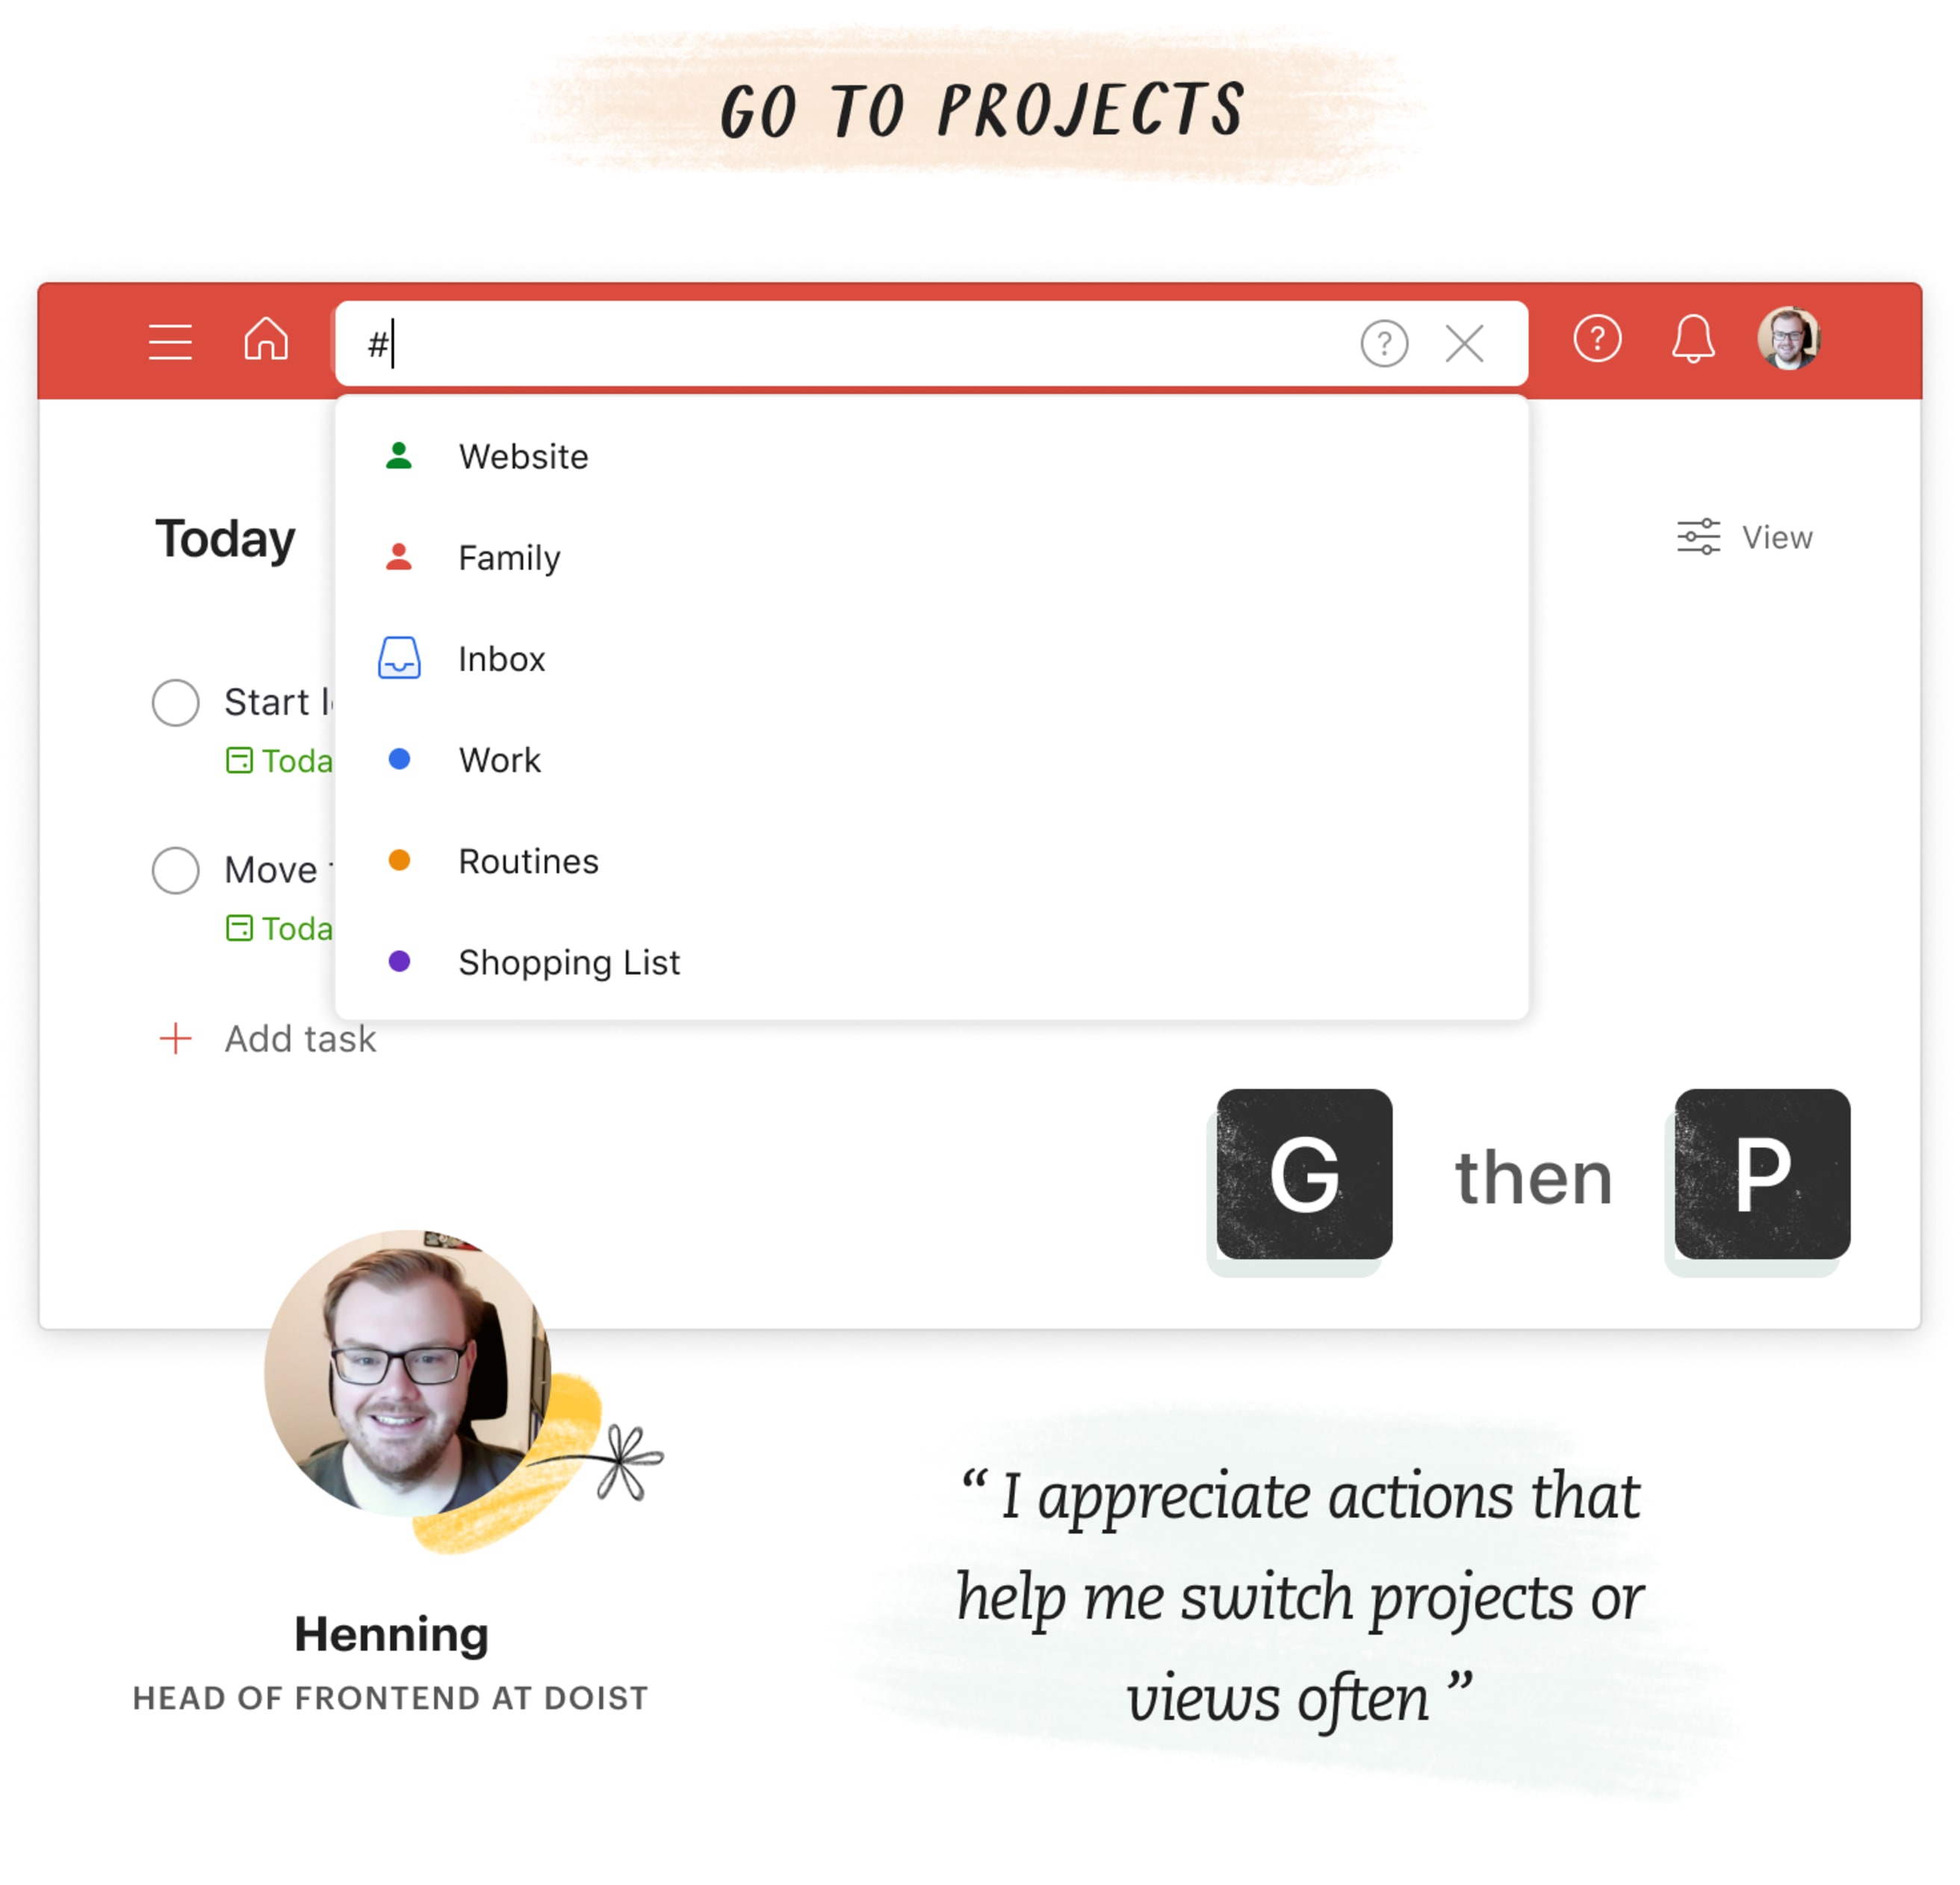 &quot;I appreciate actions that help me switch between projects or views often,&quot; said Henning, Head of Frontend at Doist. He uses G then P to go to projects.